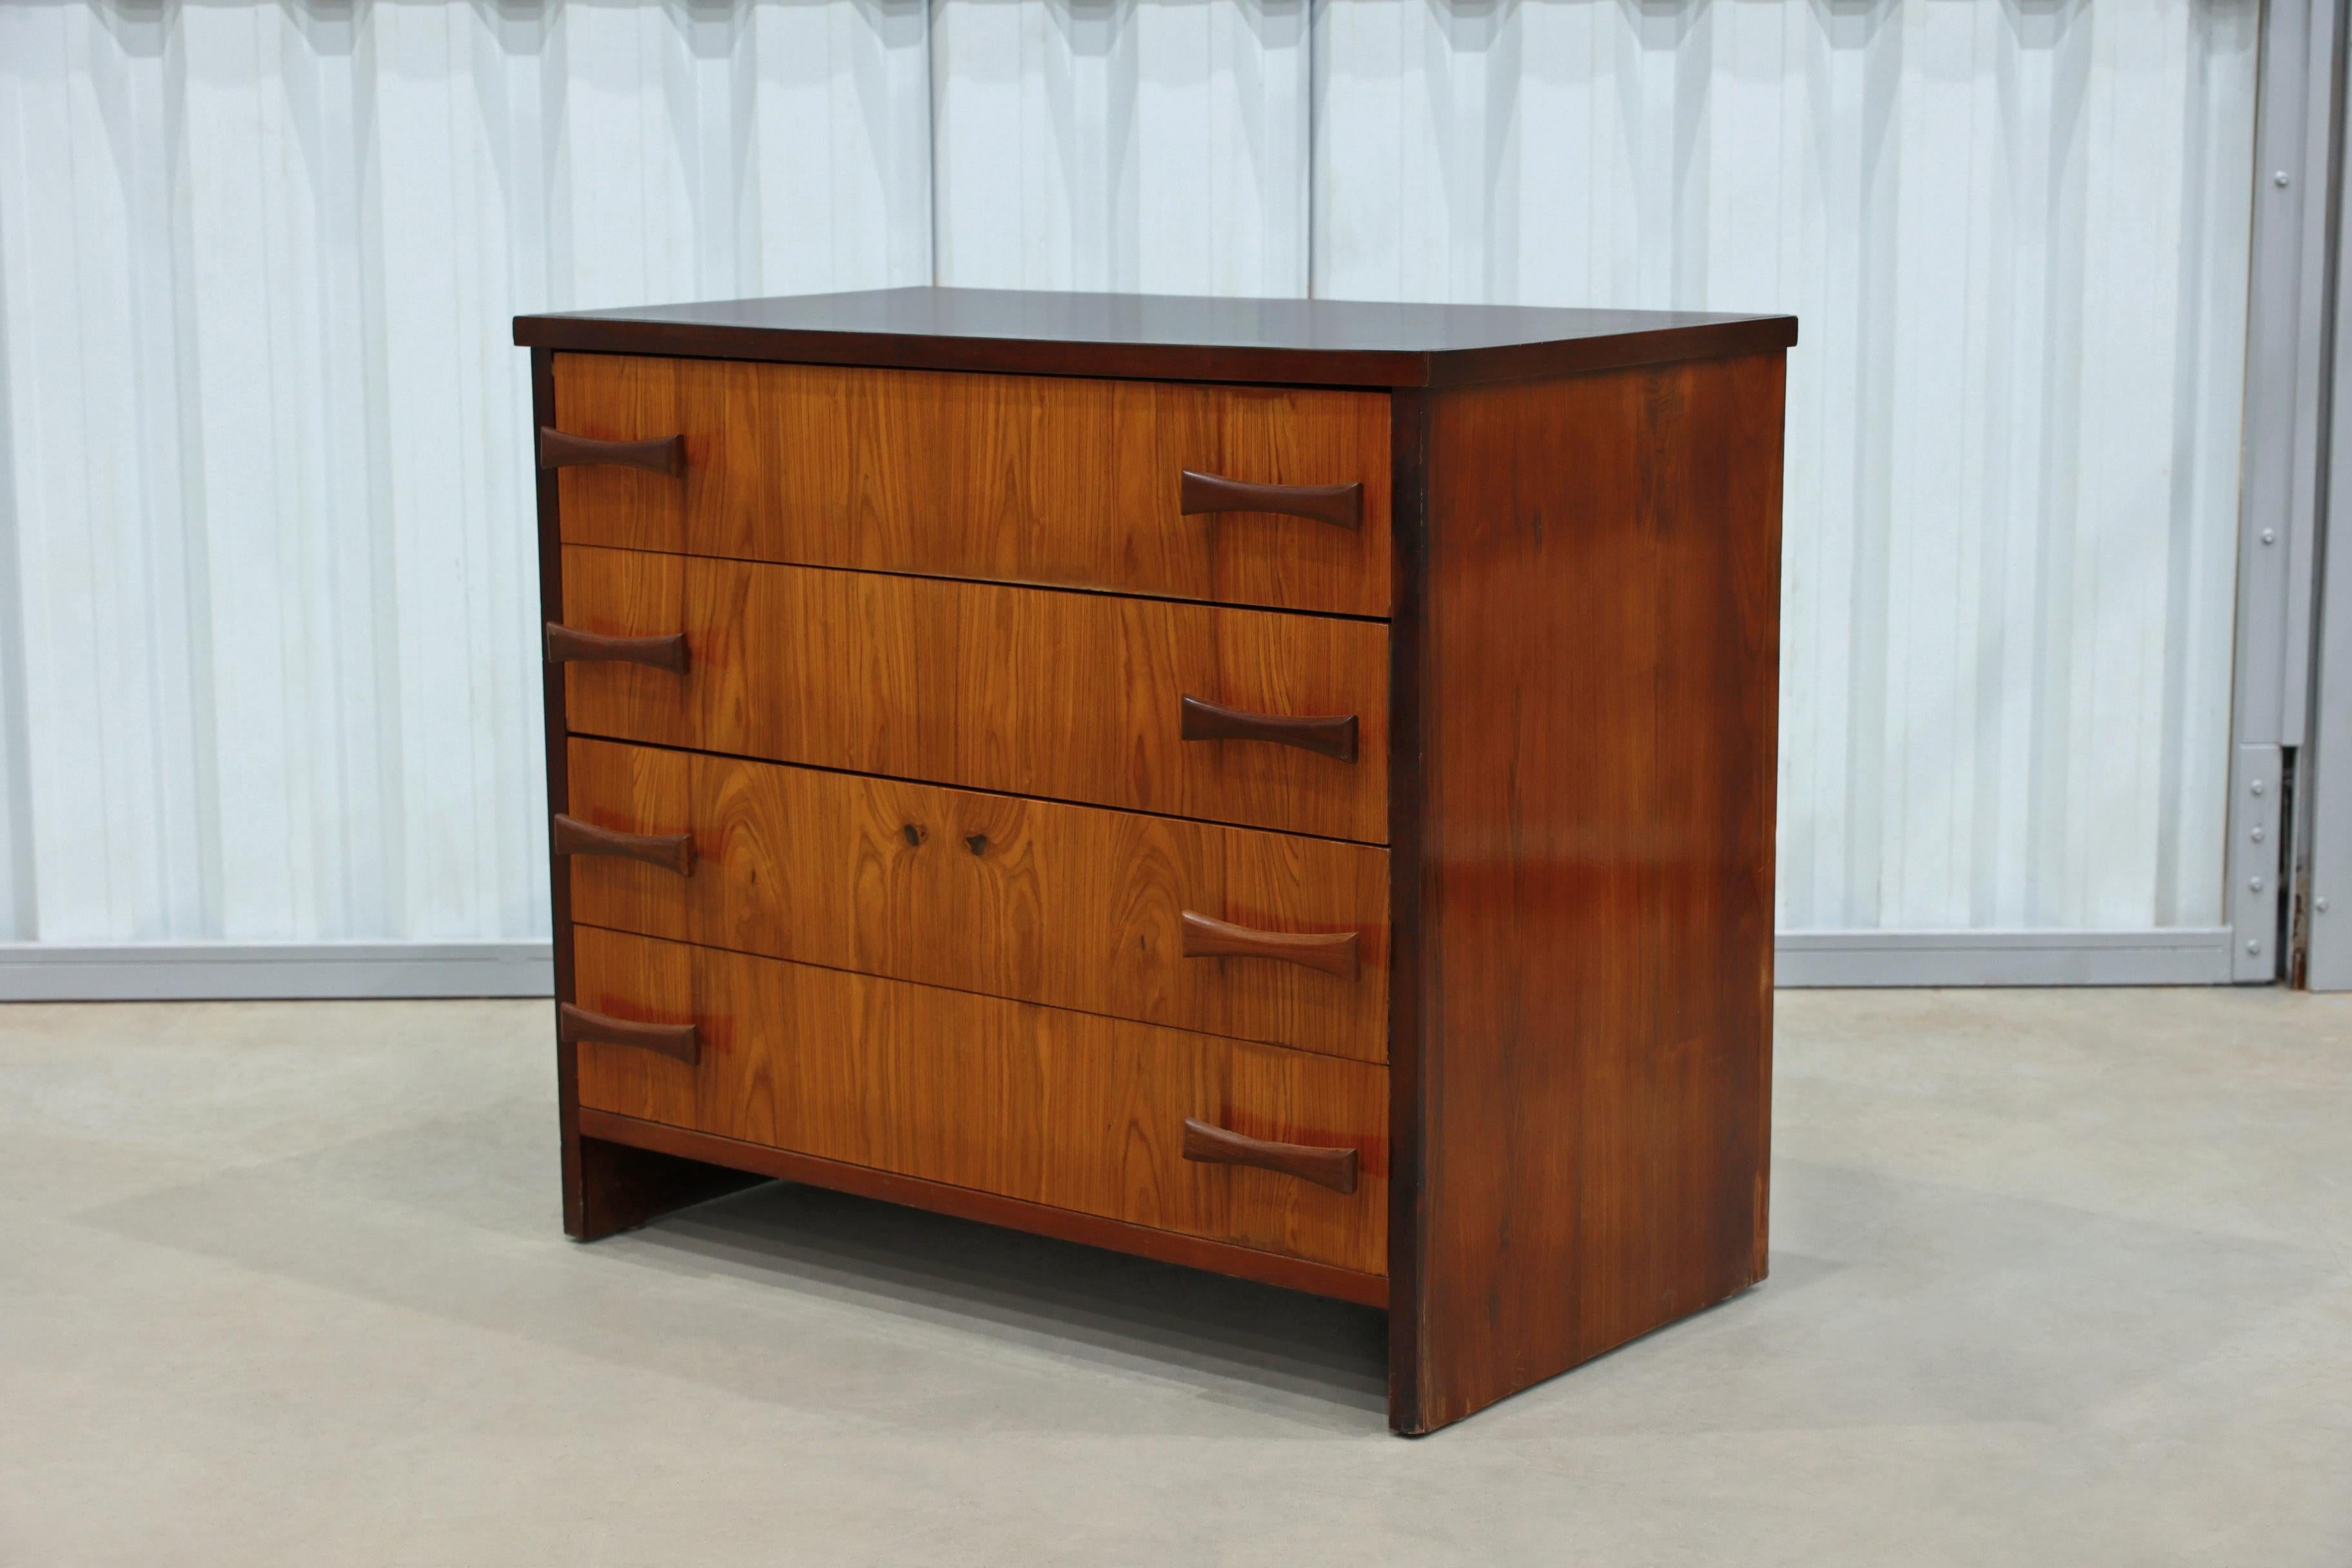 Brazilian Mid-Century Modern Chest of Drawers in Caviuna wood, Unknown, c. 1950 For Sale